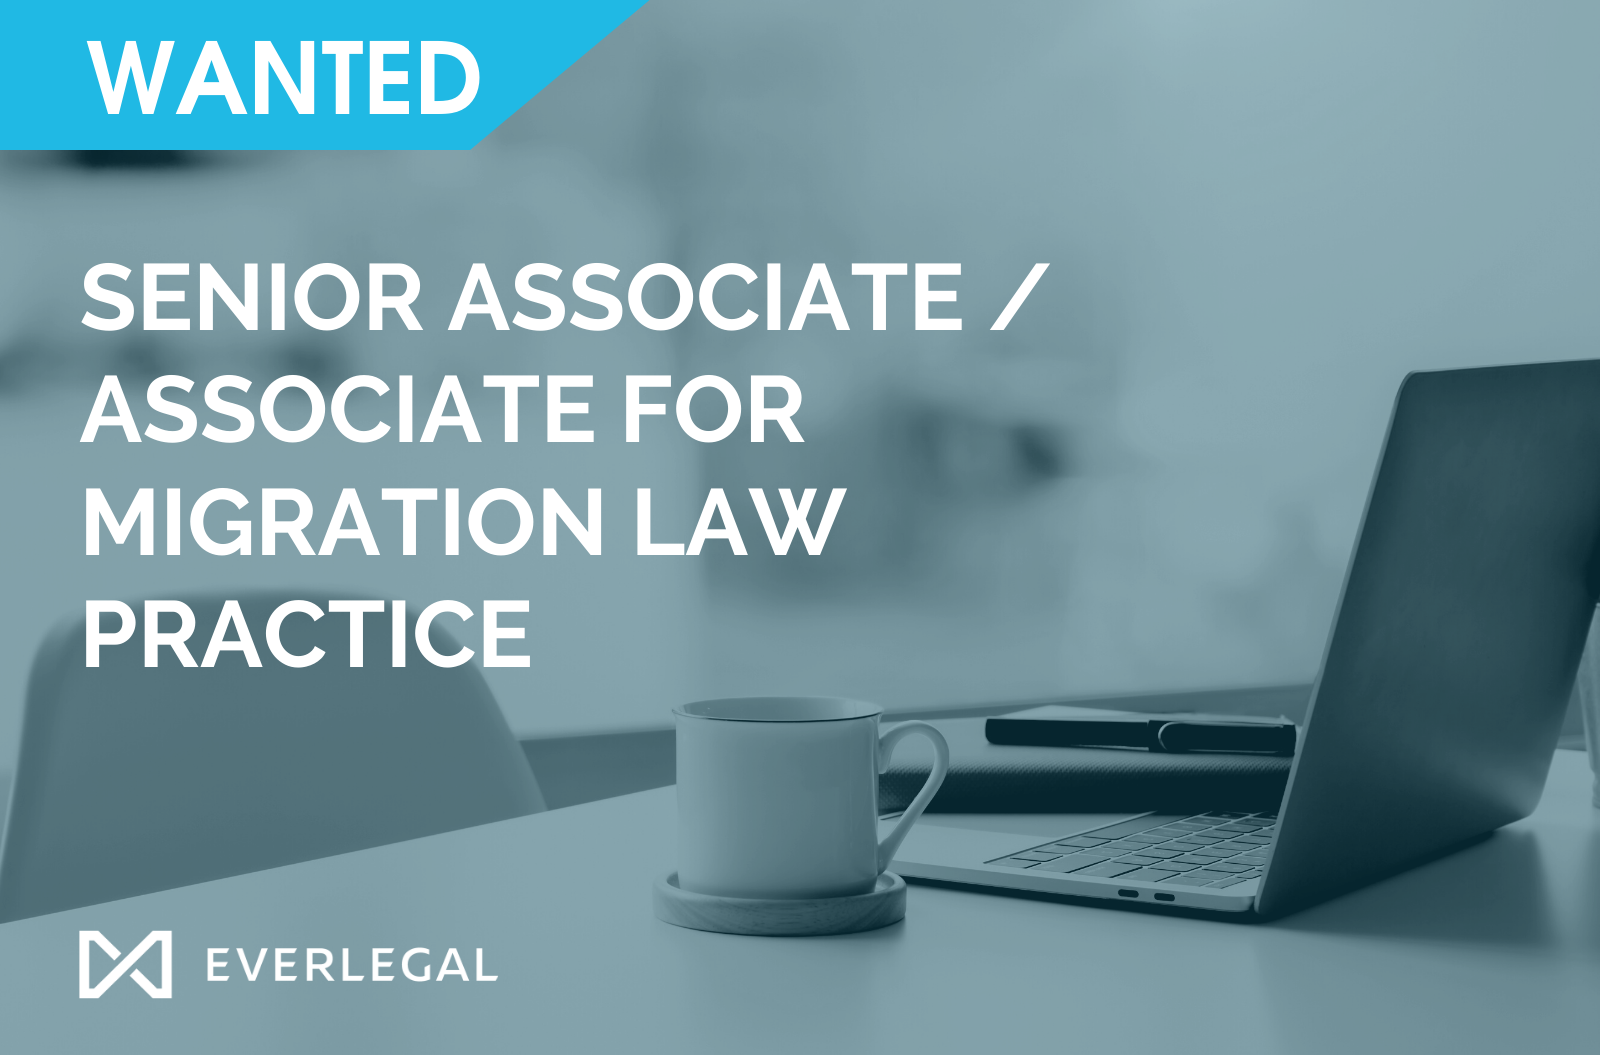 Wanted: Senior Associate / Associate for Migration Law Practice